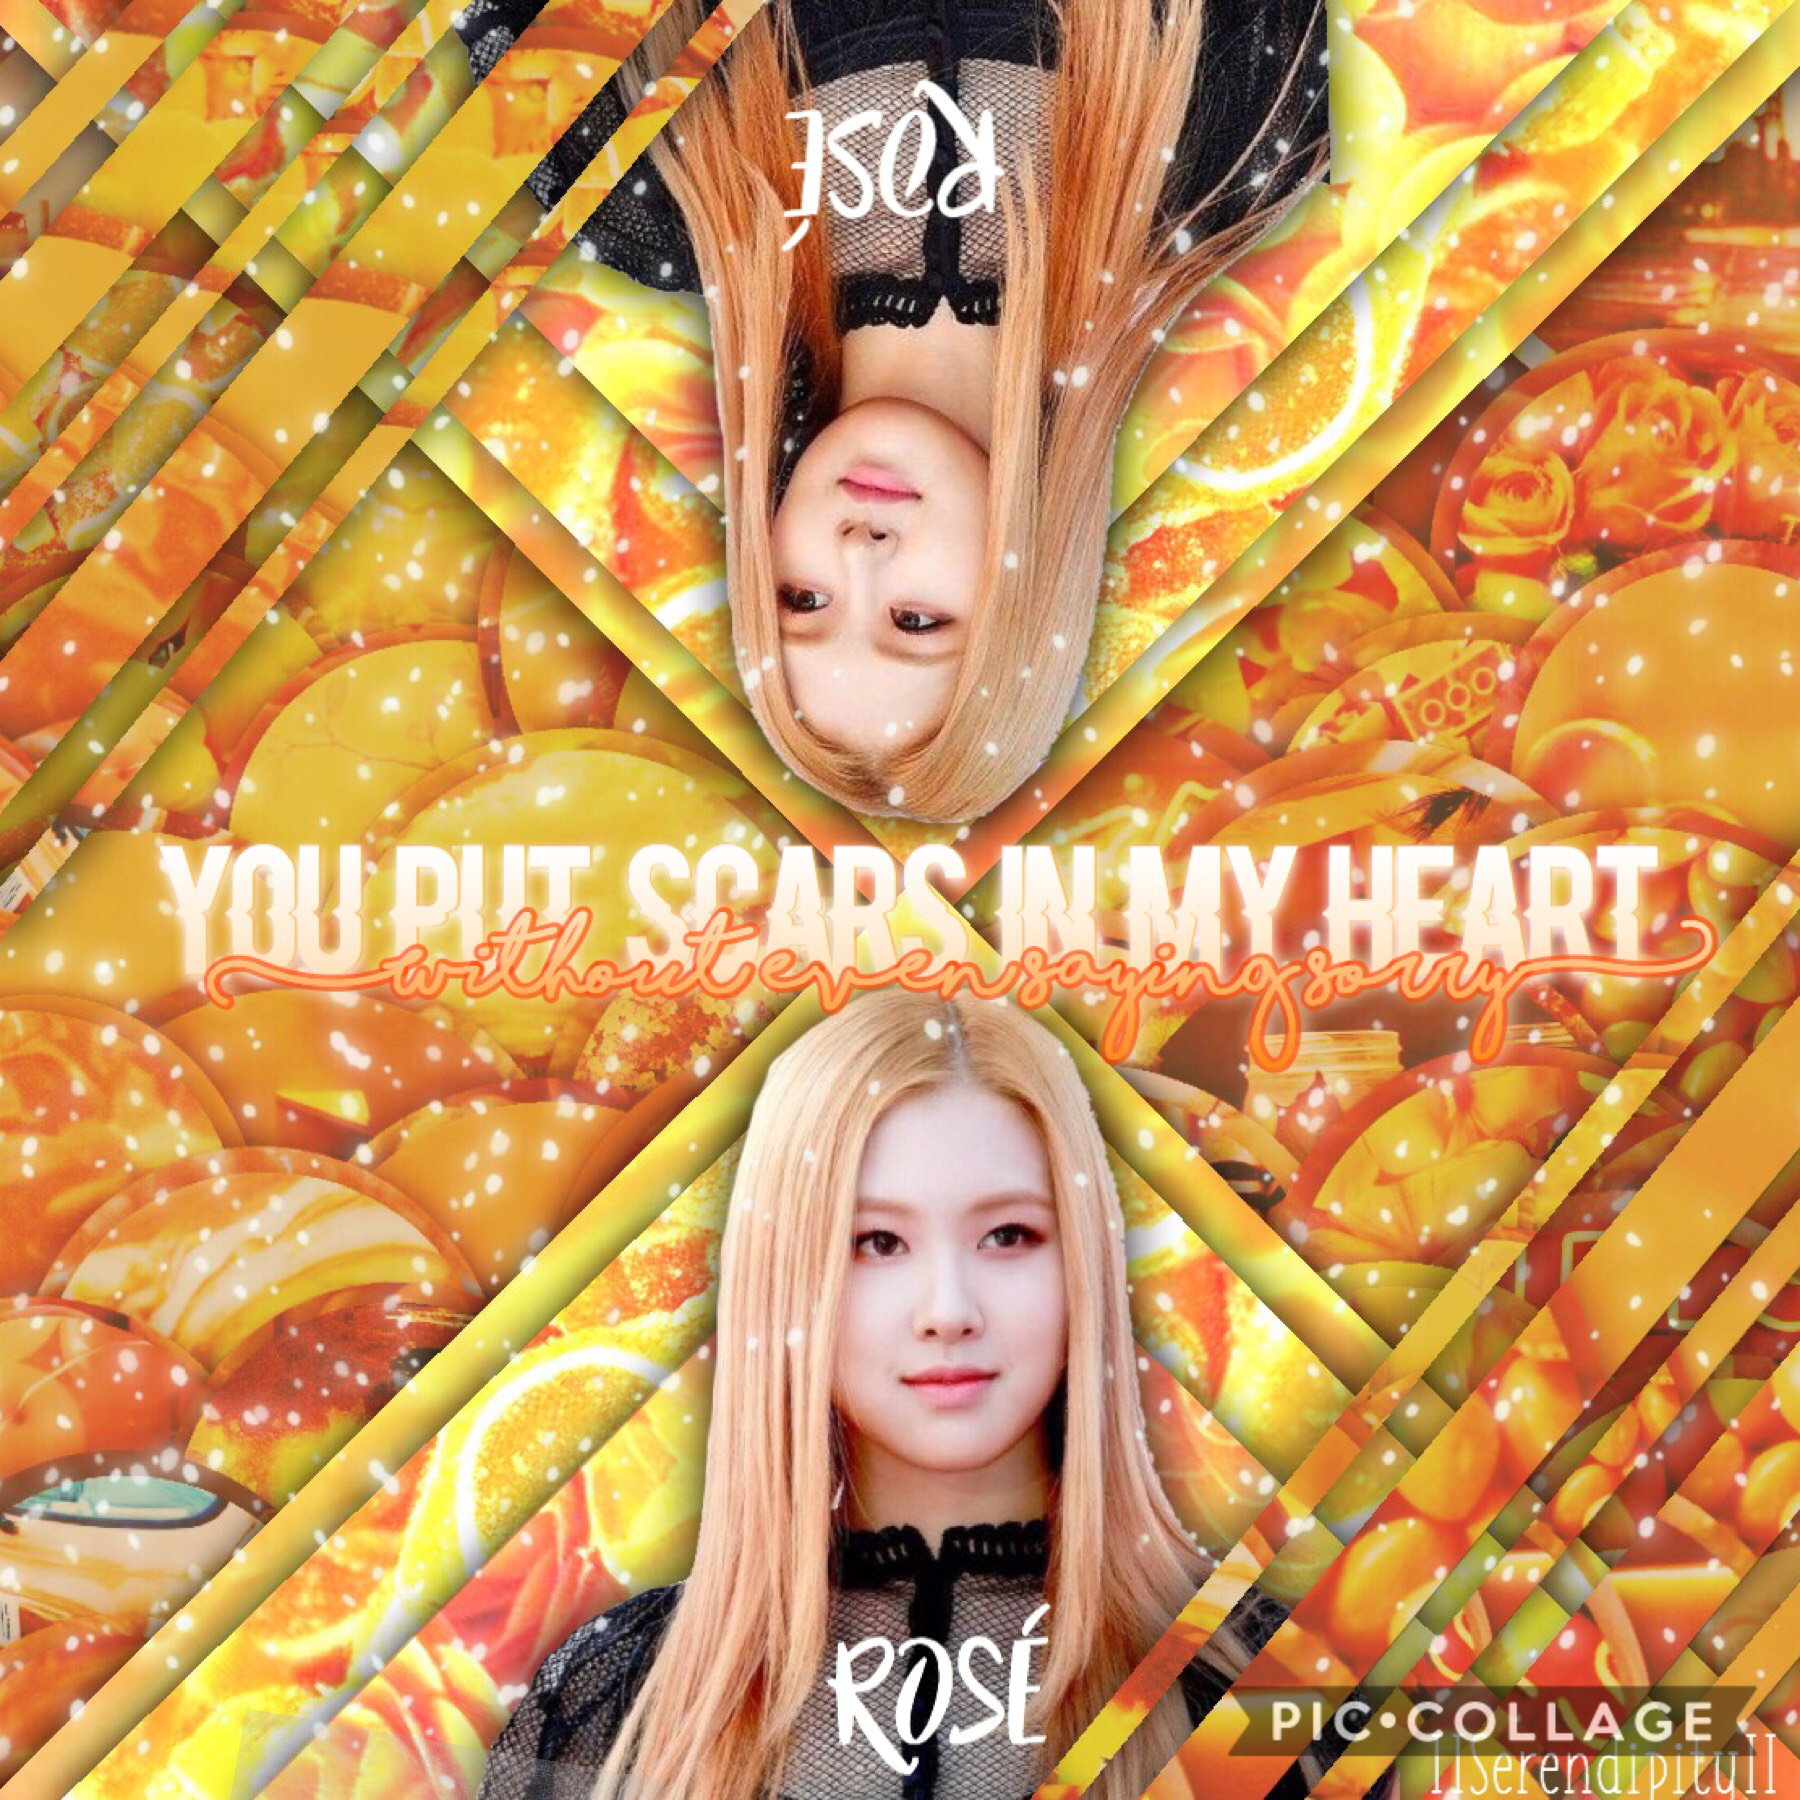 🍊Tap!🍊
I realized I did all of the bp members except Rosé and i just  had to make an edit of her because she is super talented an baeutiful! Have an amazing day everyone!
😊💕🐥
🧀( <---you know when you are😂)